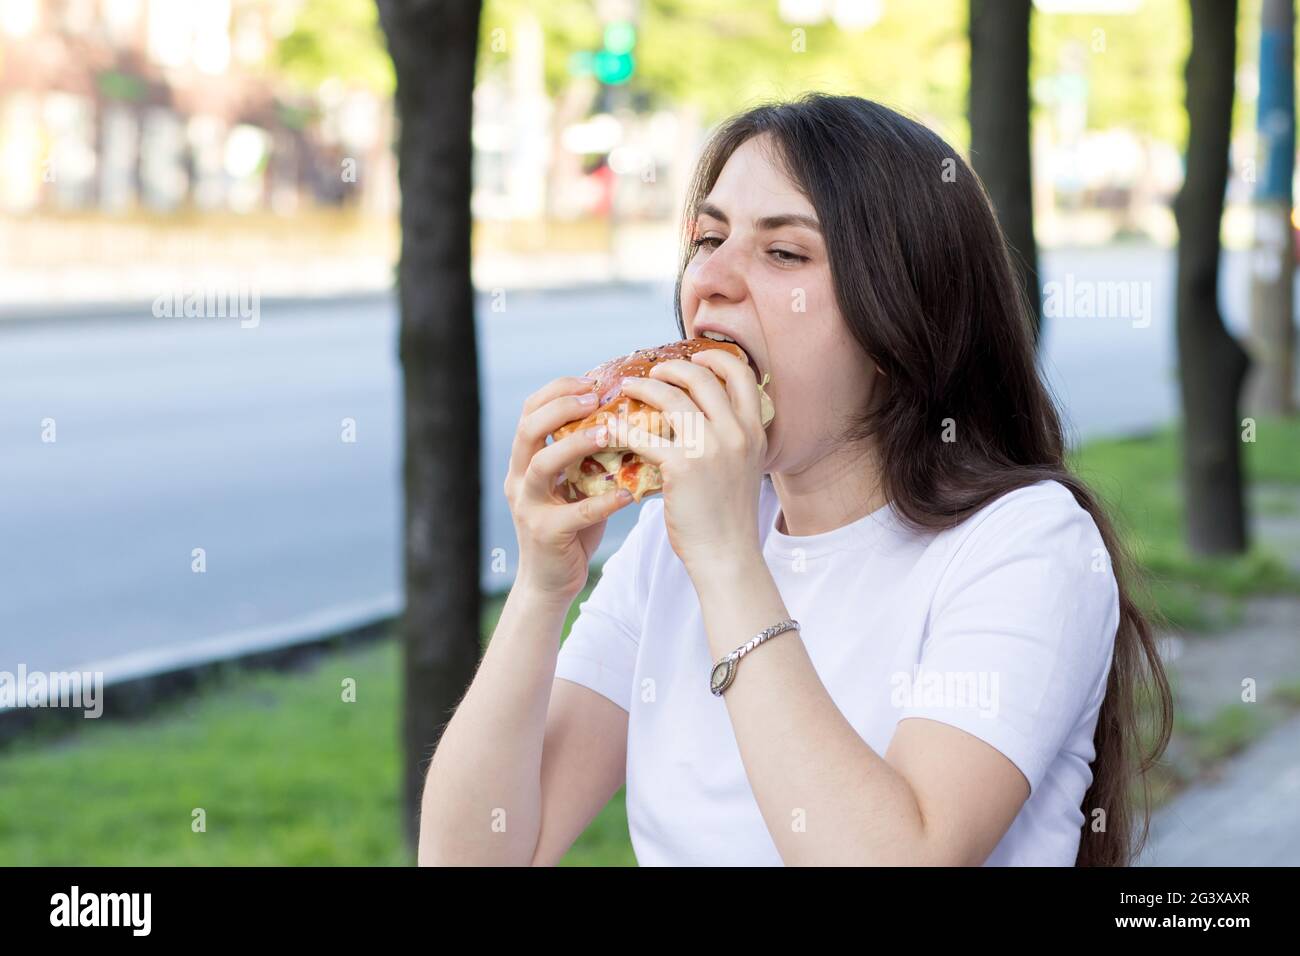 Brunette woman overeats on a burger on the street. Gluttony, excess calories, and bulimia. Stock Photo